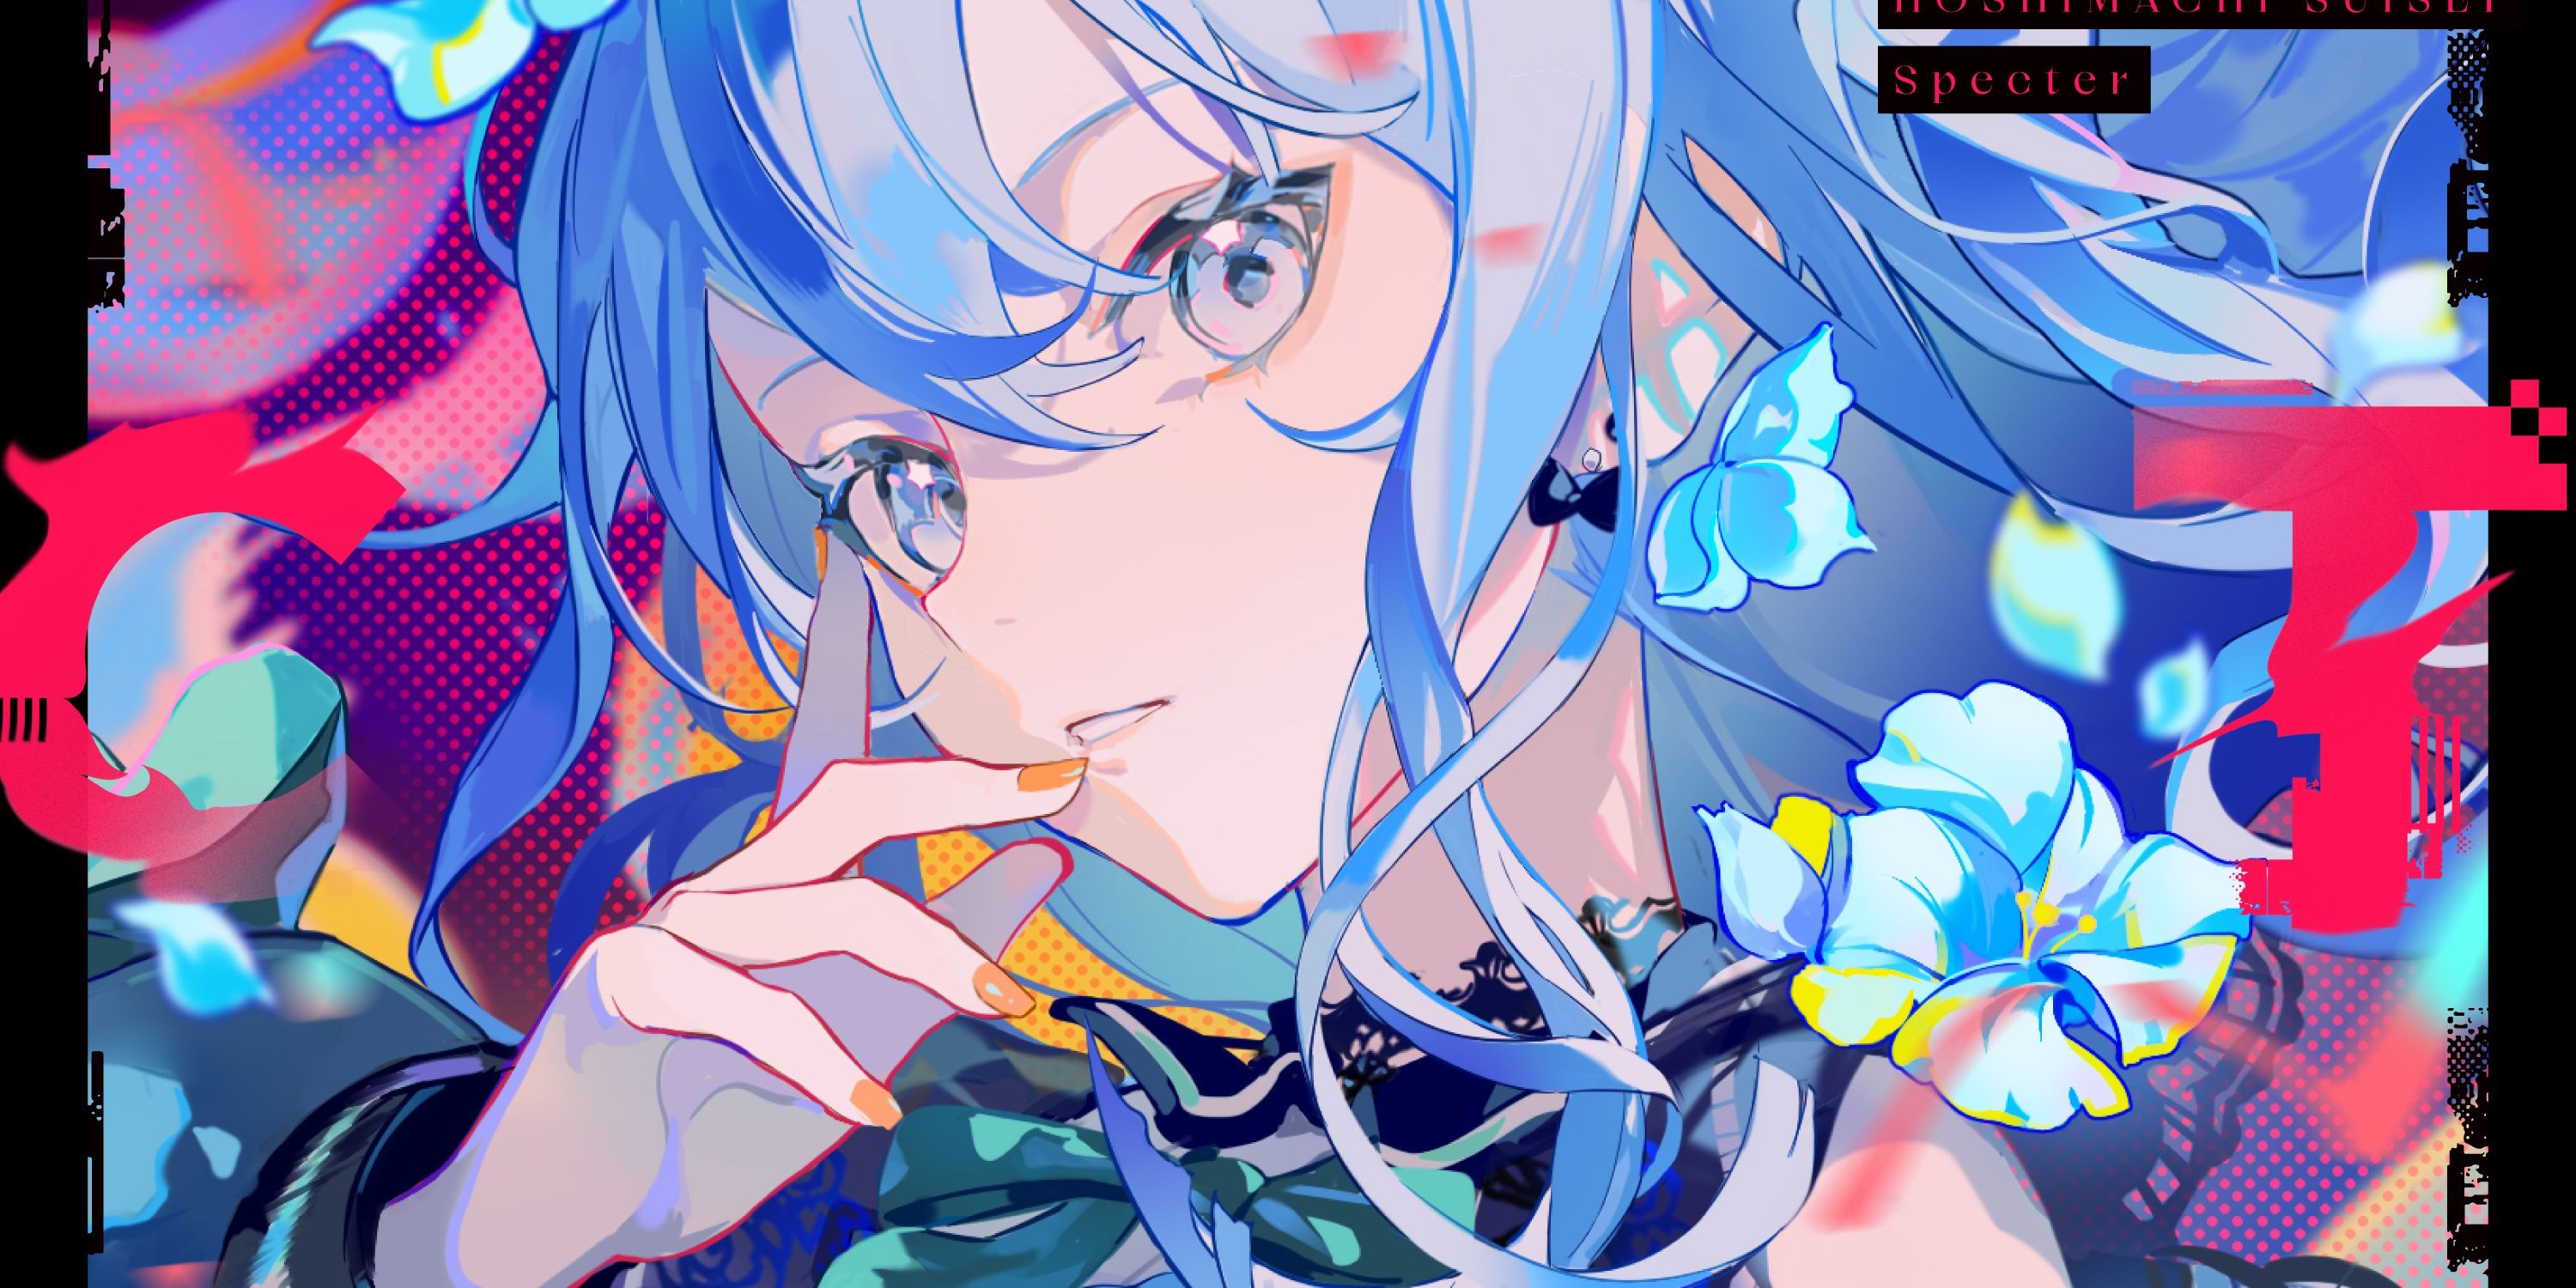 Image from Suisei's album, "spook"It shows her surrounded by blue flowers as she holds a hand in front of her face and looks at the screen.